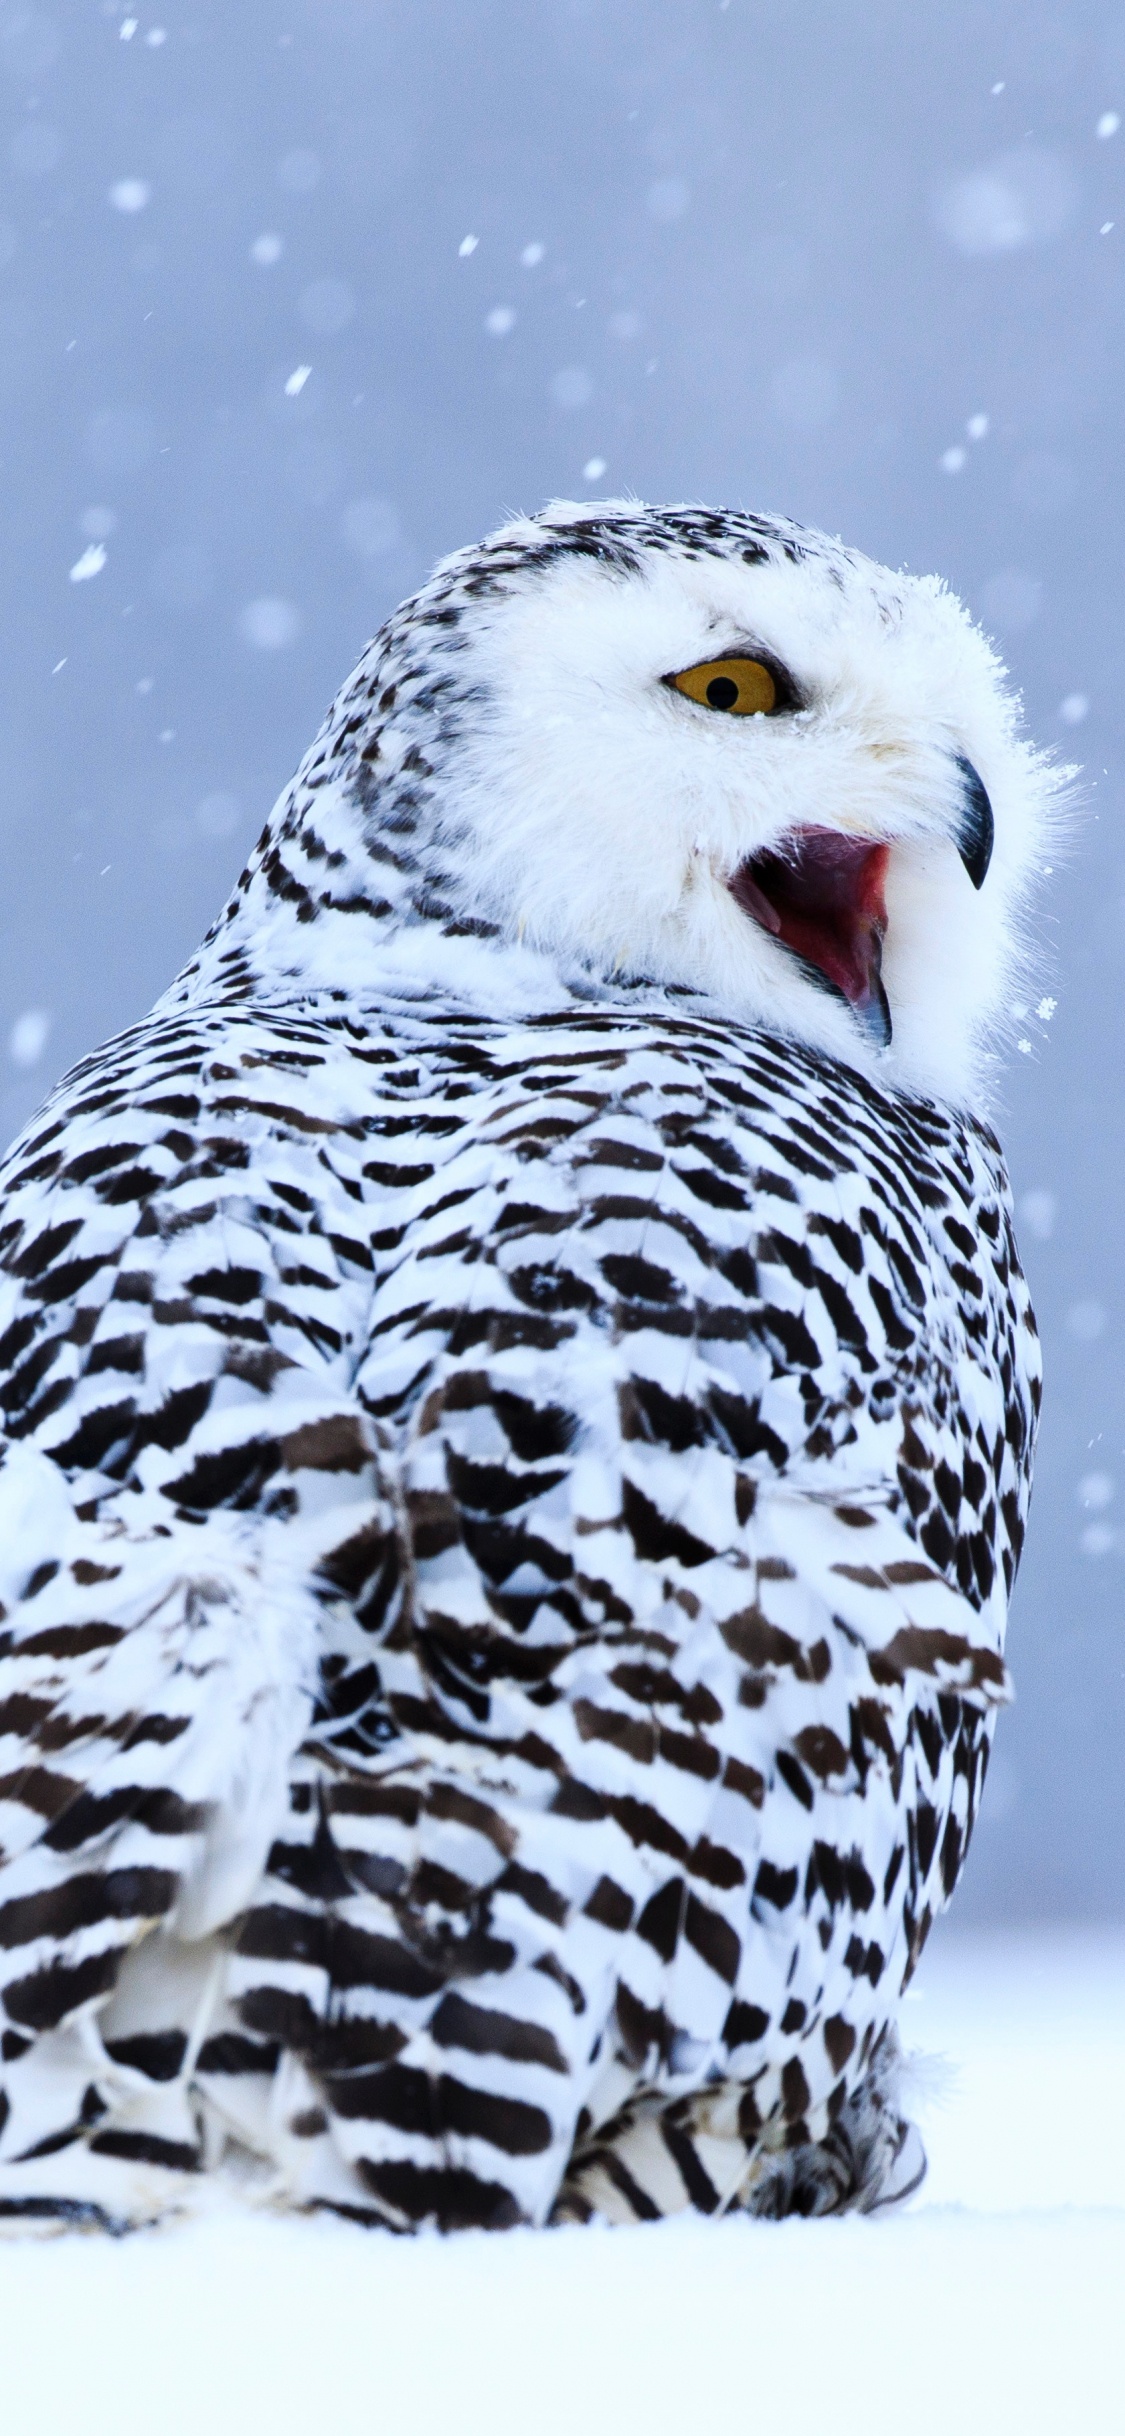 White and Black Owl on Snow Covered Ground During Daytime. Wallpaper in 1125x2436 Resolution